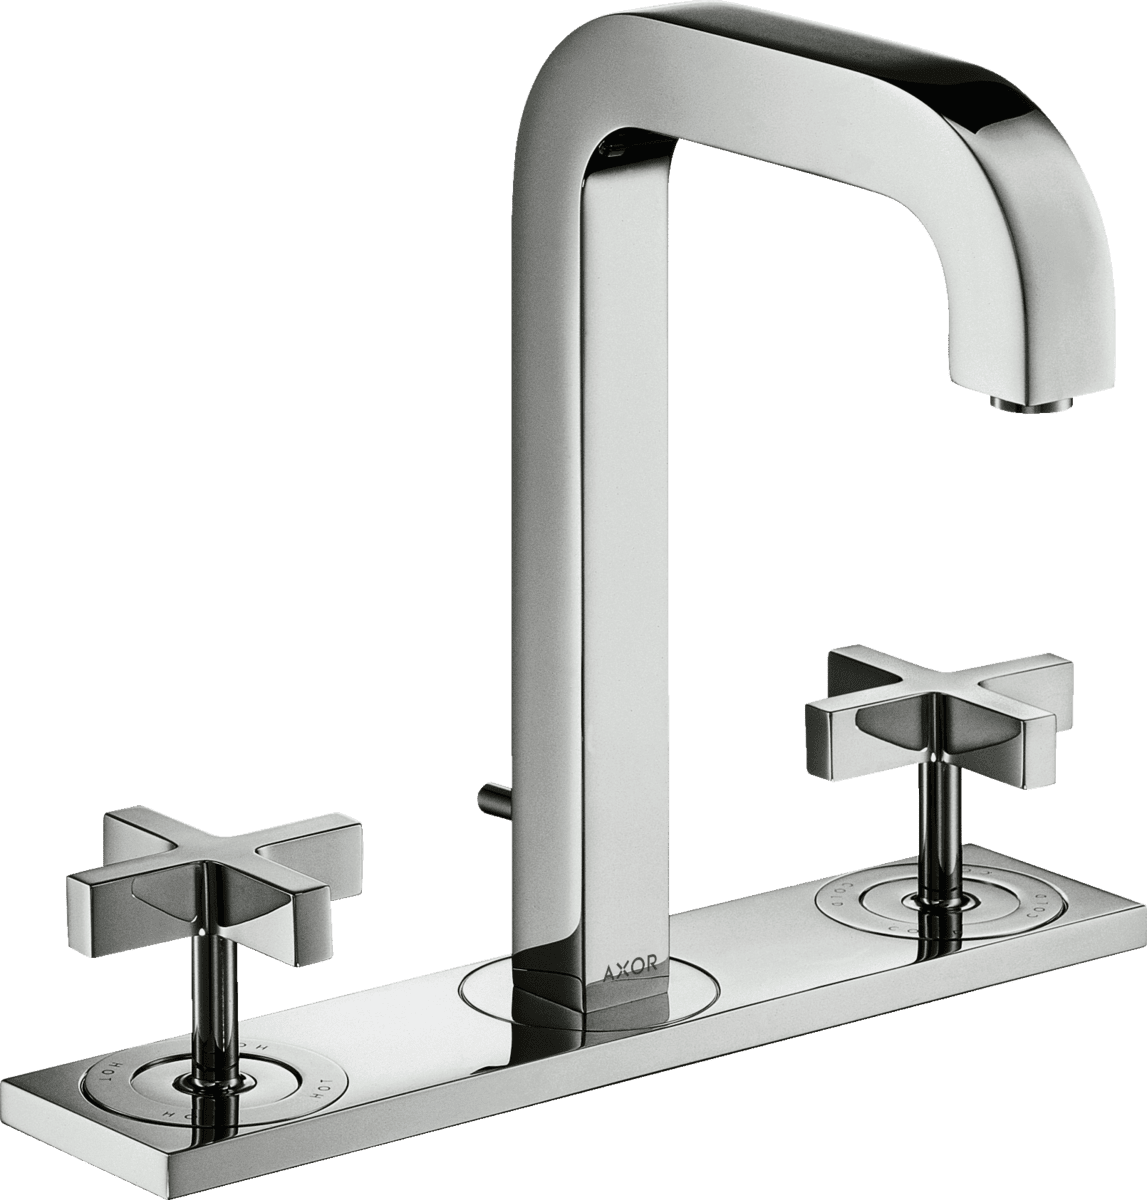 Picture of HANSGROHE AXOR Citterio 3-hole basin mixer 170 with spout 140 mm, cross handles, plate and pop-up waste set #39134000 - Chrome